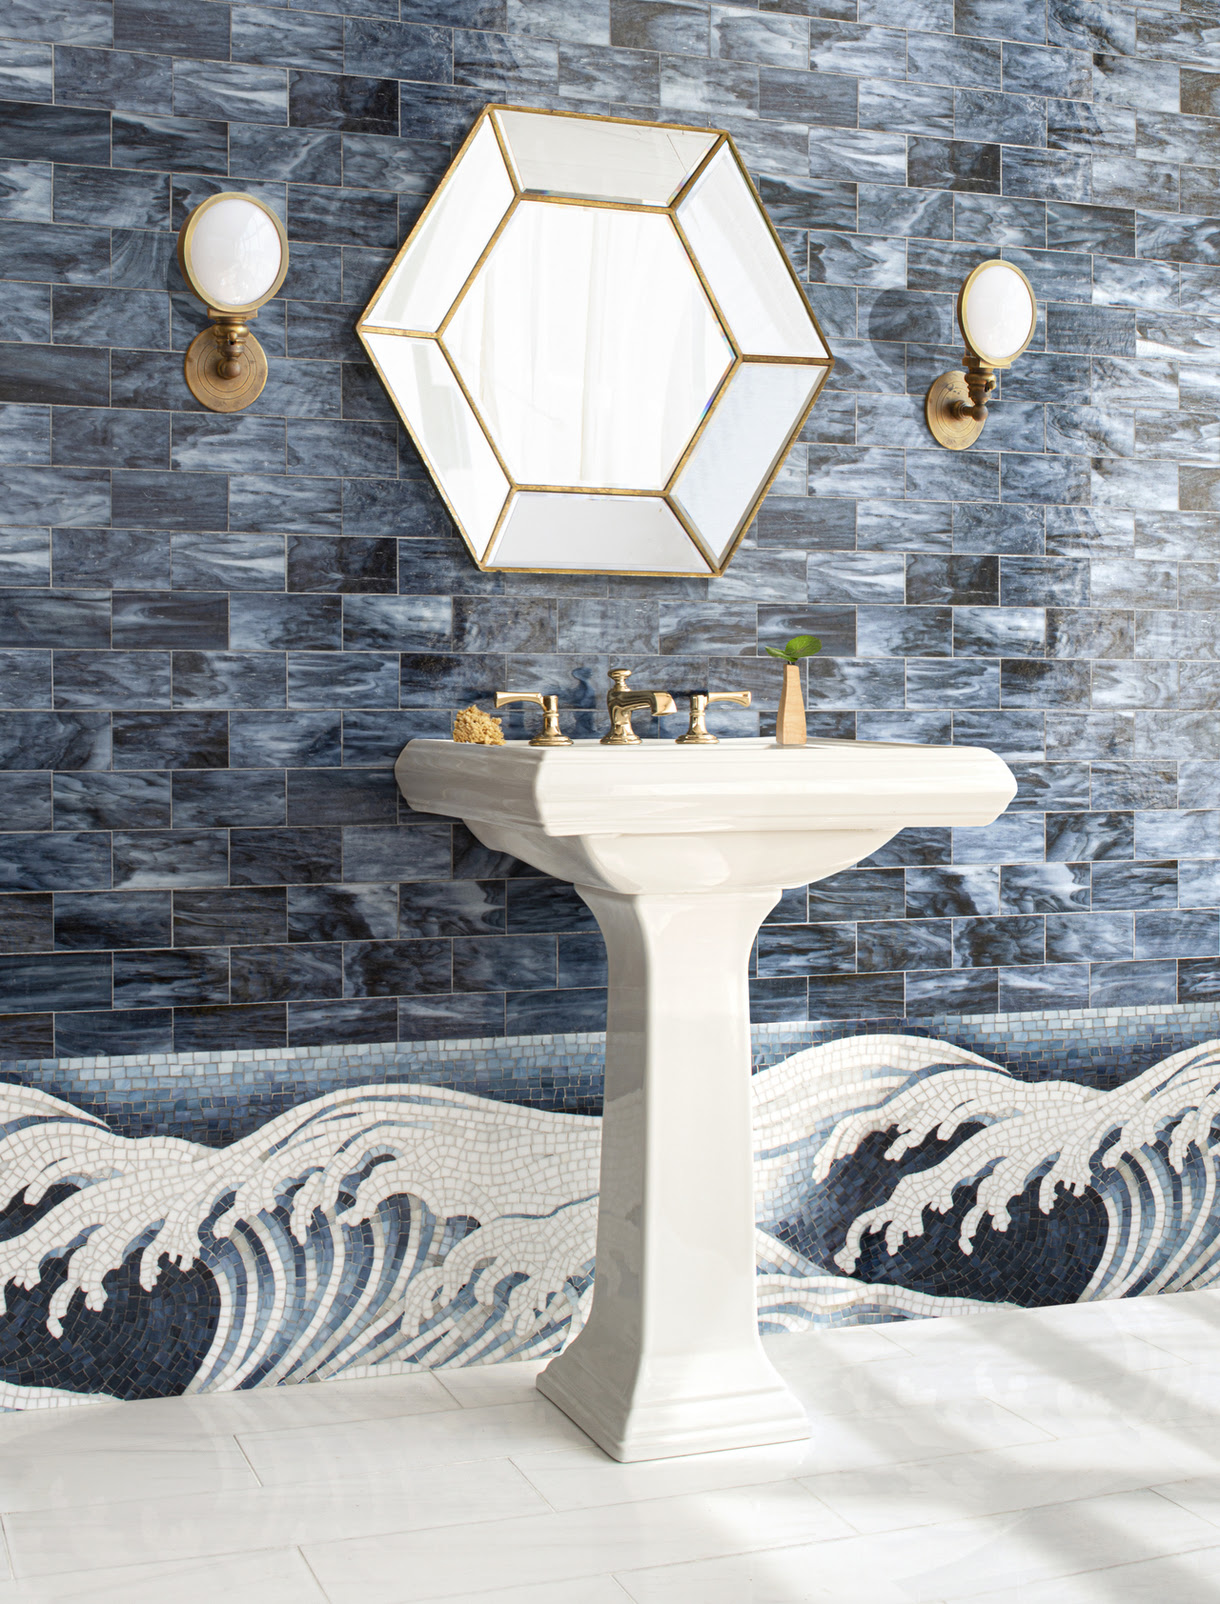 New Ravenna Reinterprets Wallpaper Into New Mosaic Collection | Residential  Products Online